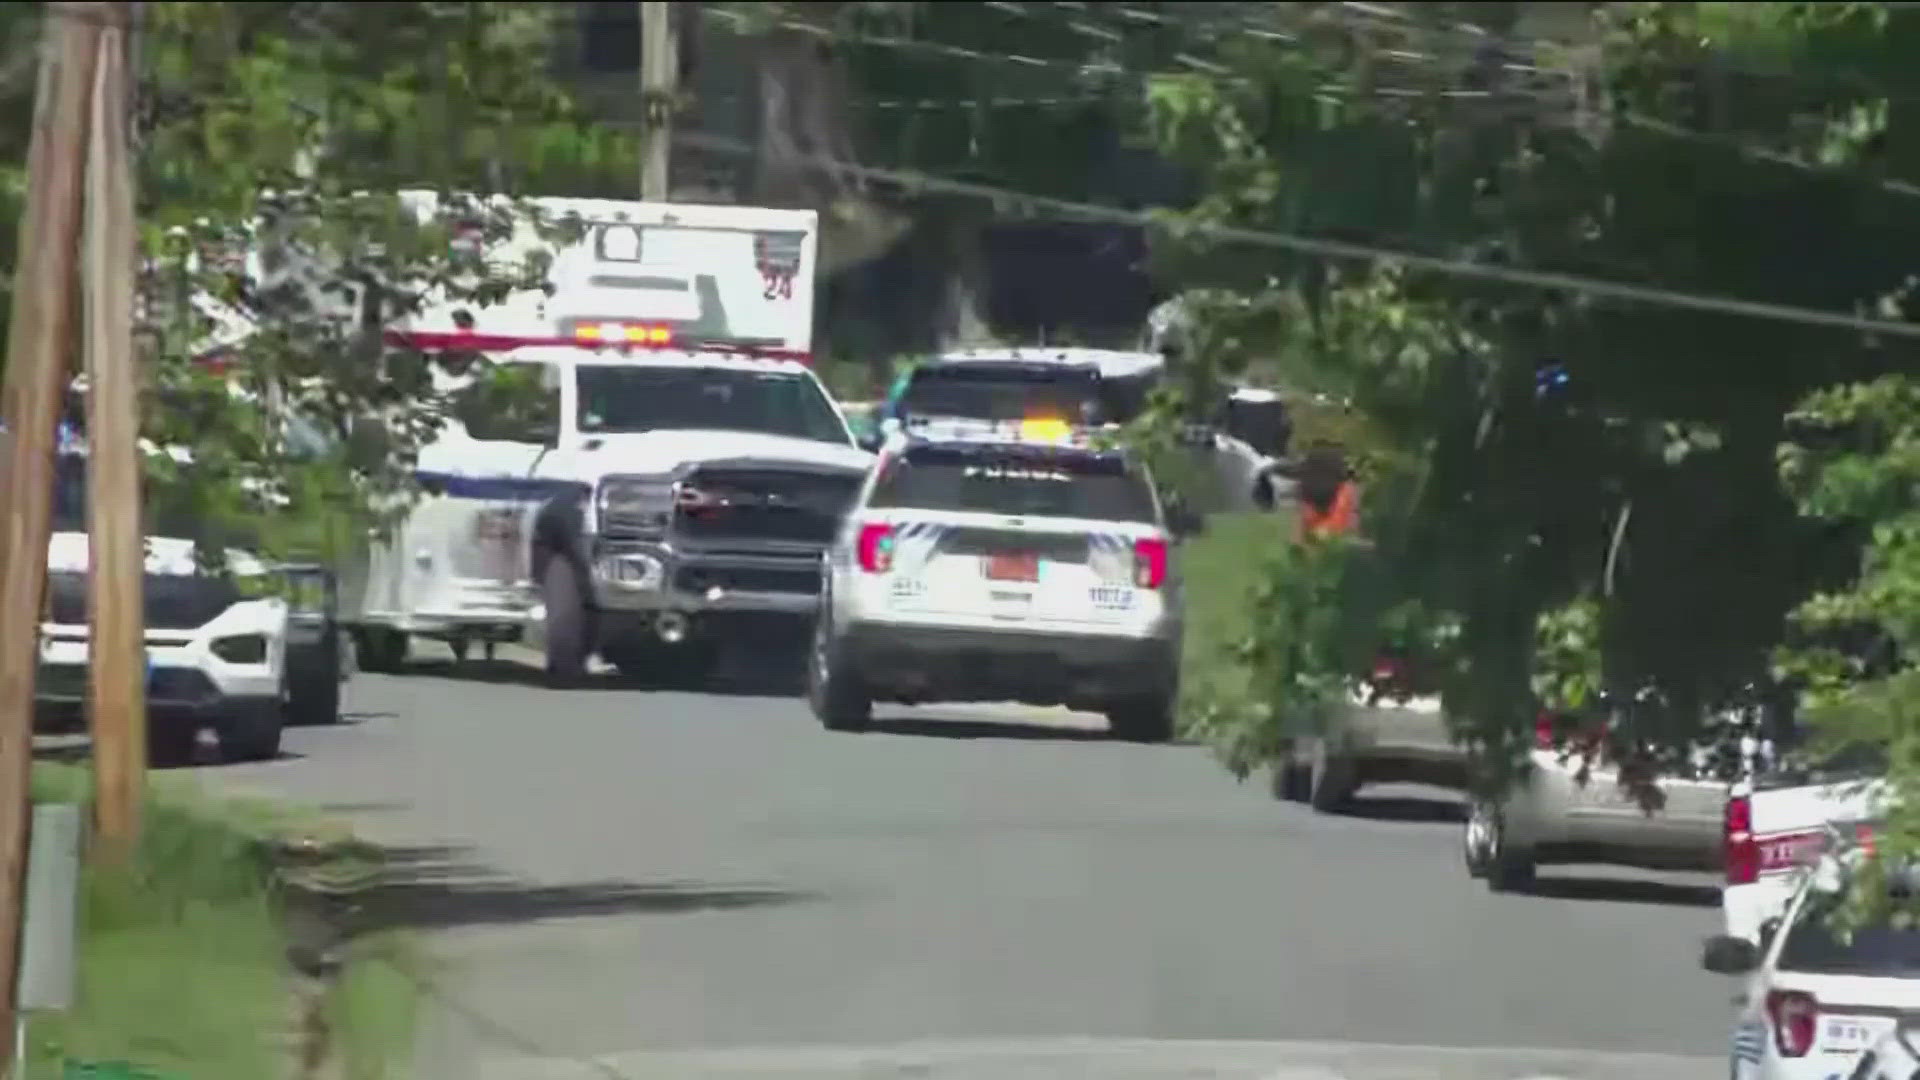 Four officers have died after a shooting in North Carolina. Multiple others are injured. Watch the video to see how it all unfolded.